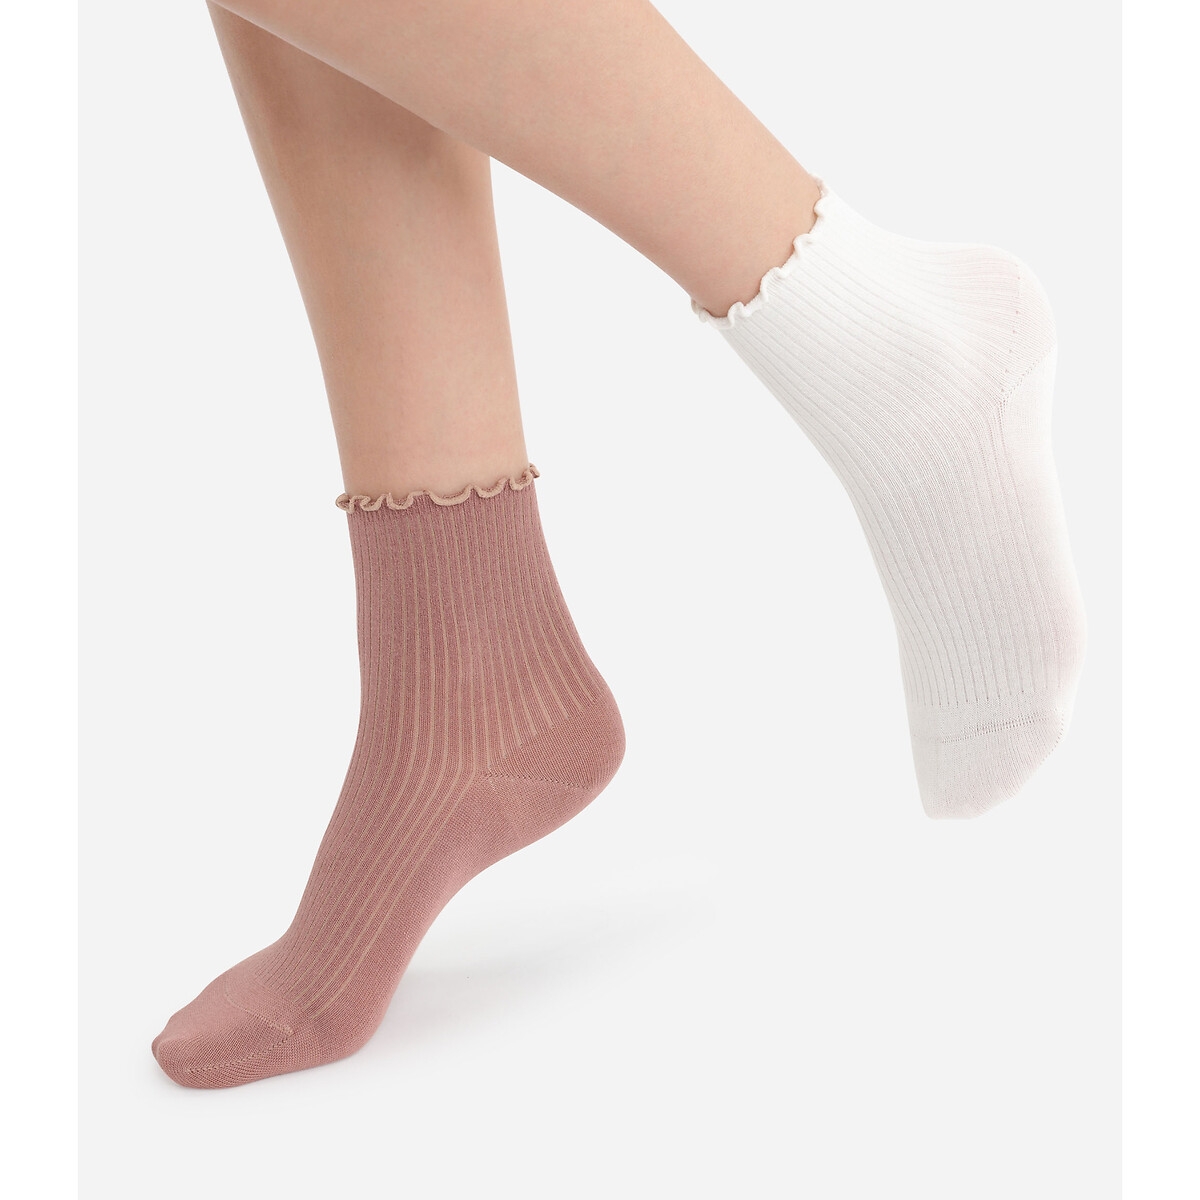 Pack of 2 Pairs of Socks with Ruffled Edging